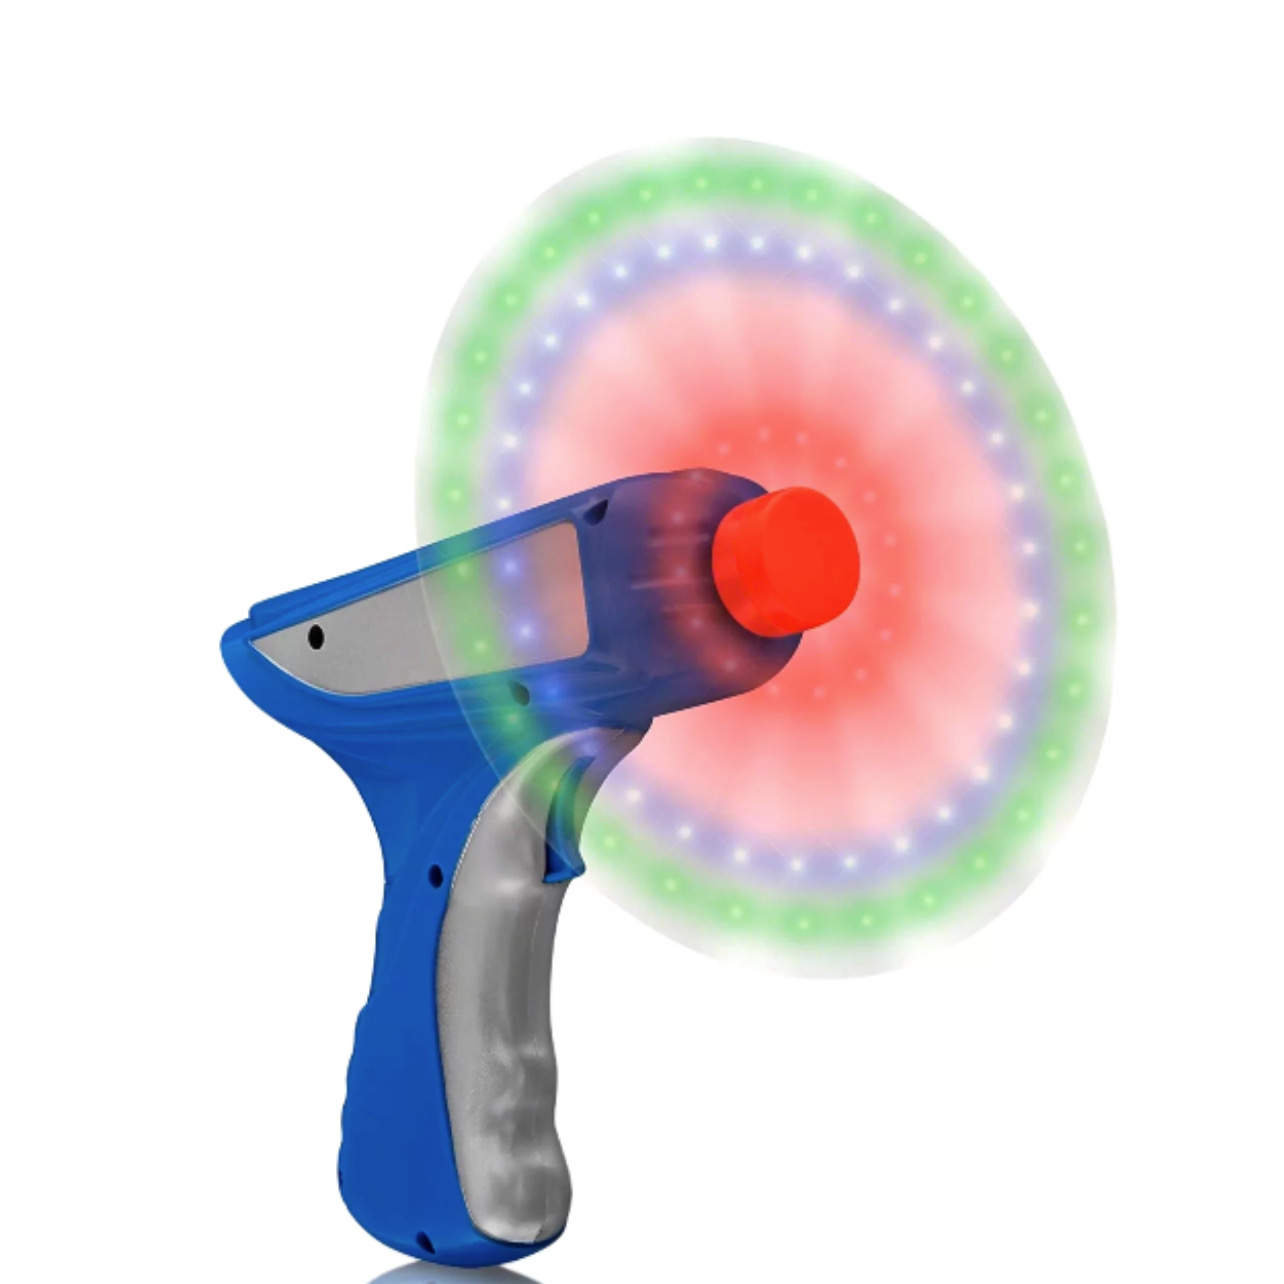 LED Spinning Pinwheel Space Blaster Toy Gun All Products